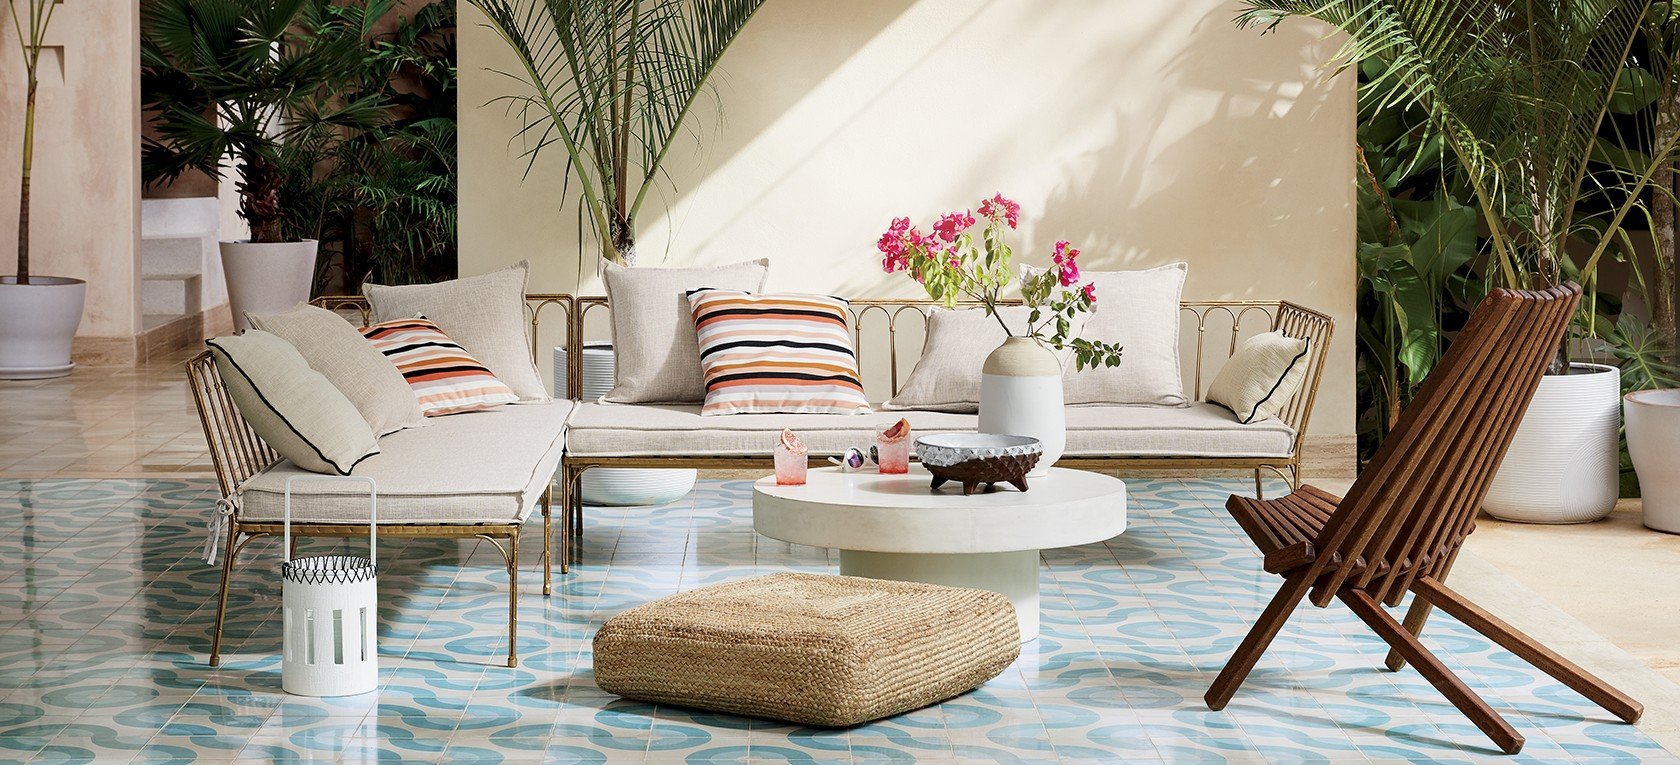 CB2's amazing outdoor collection